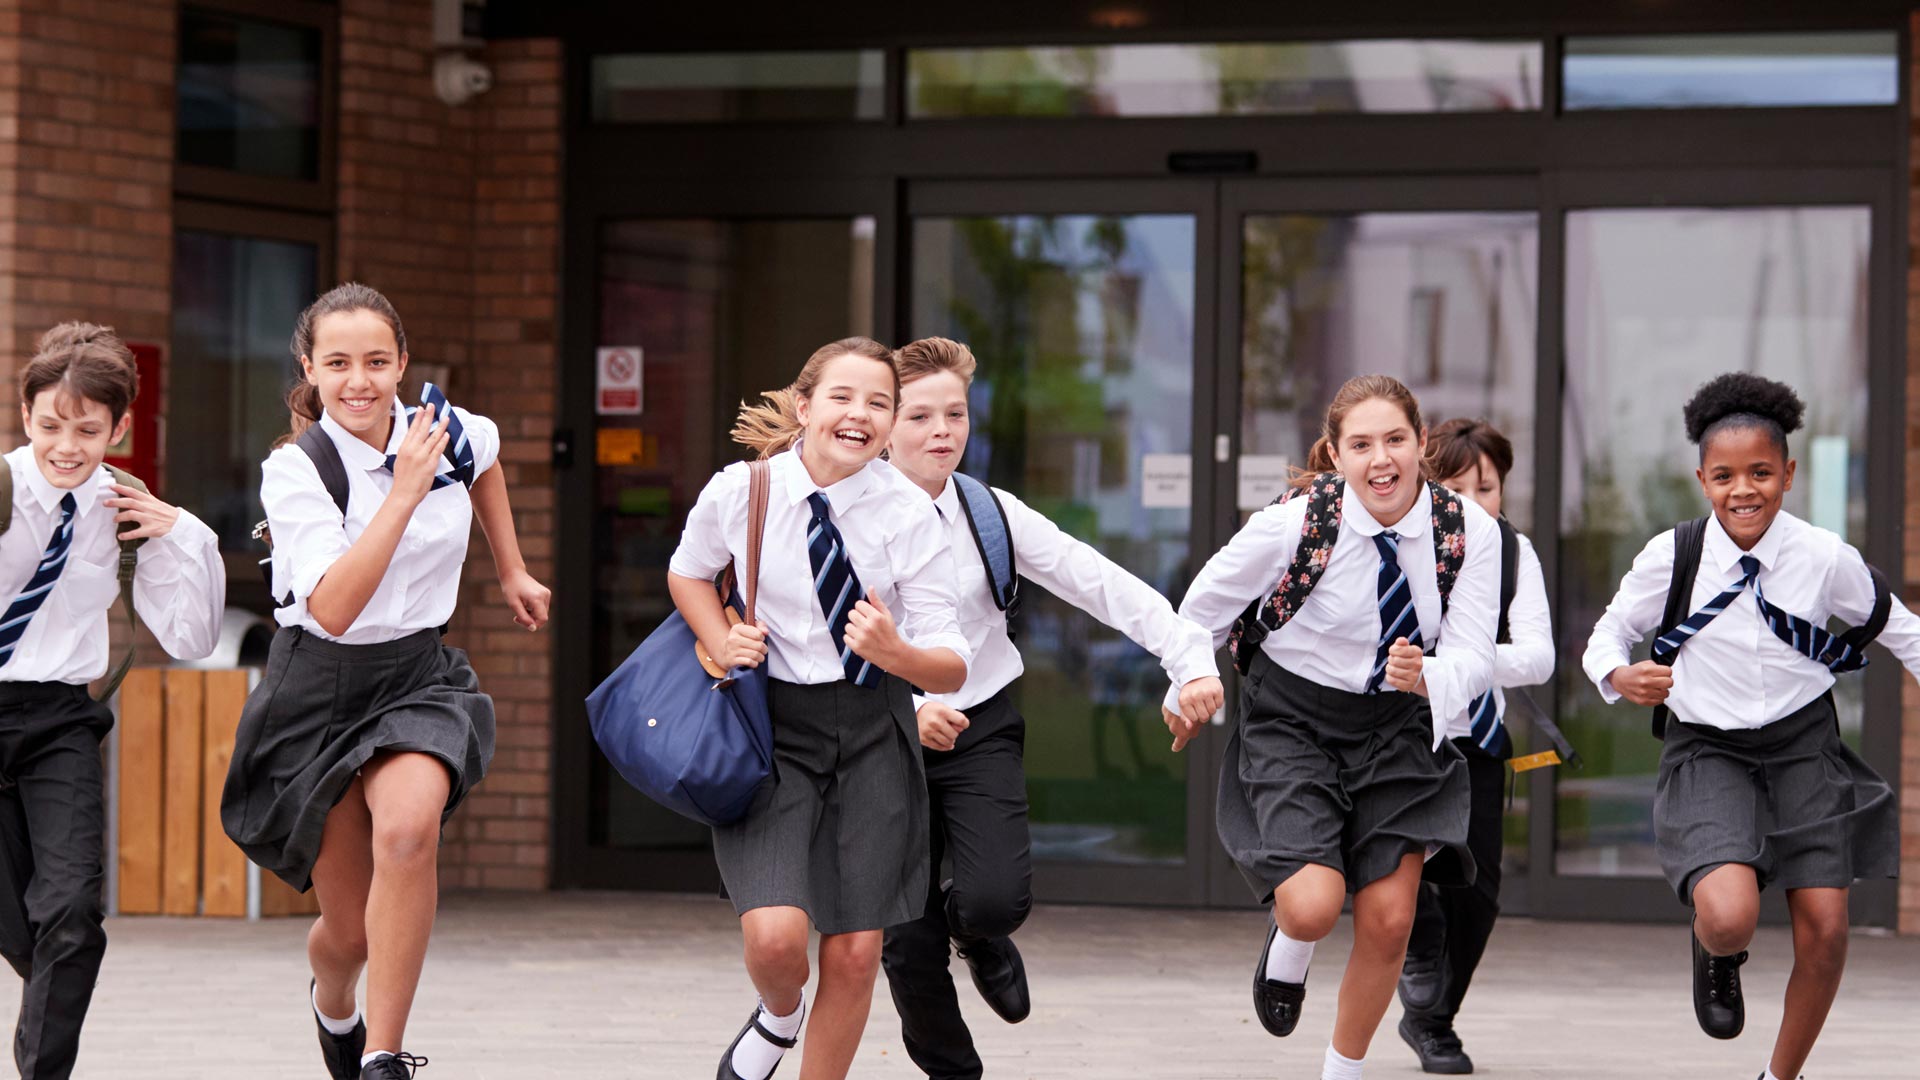 A group of mixed gender and ethnicity high school children running and laughing together.